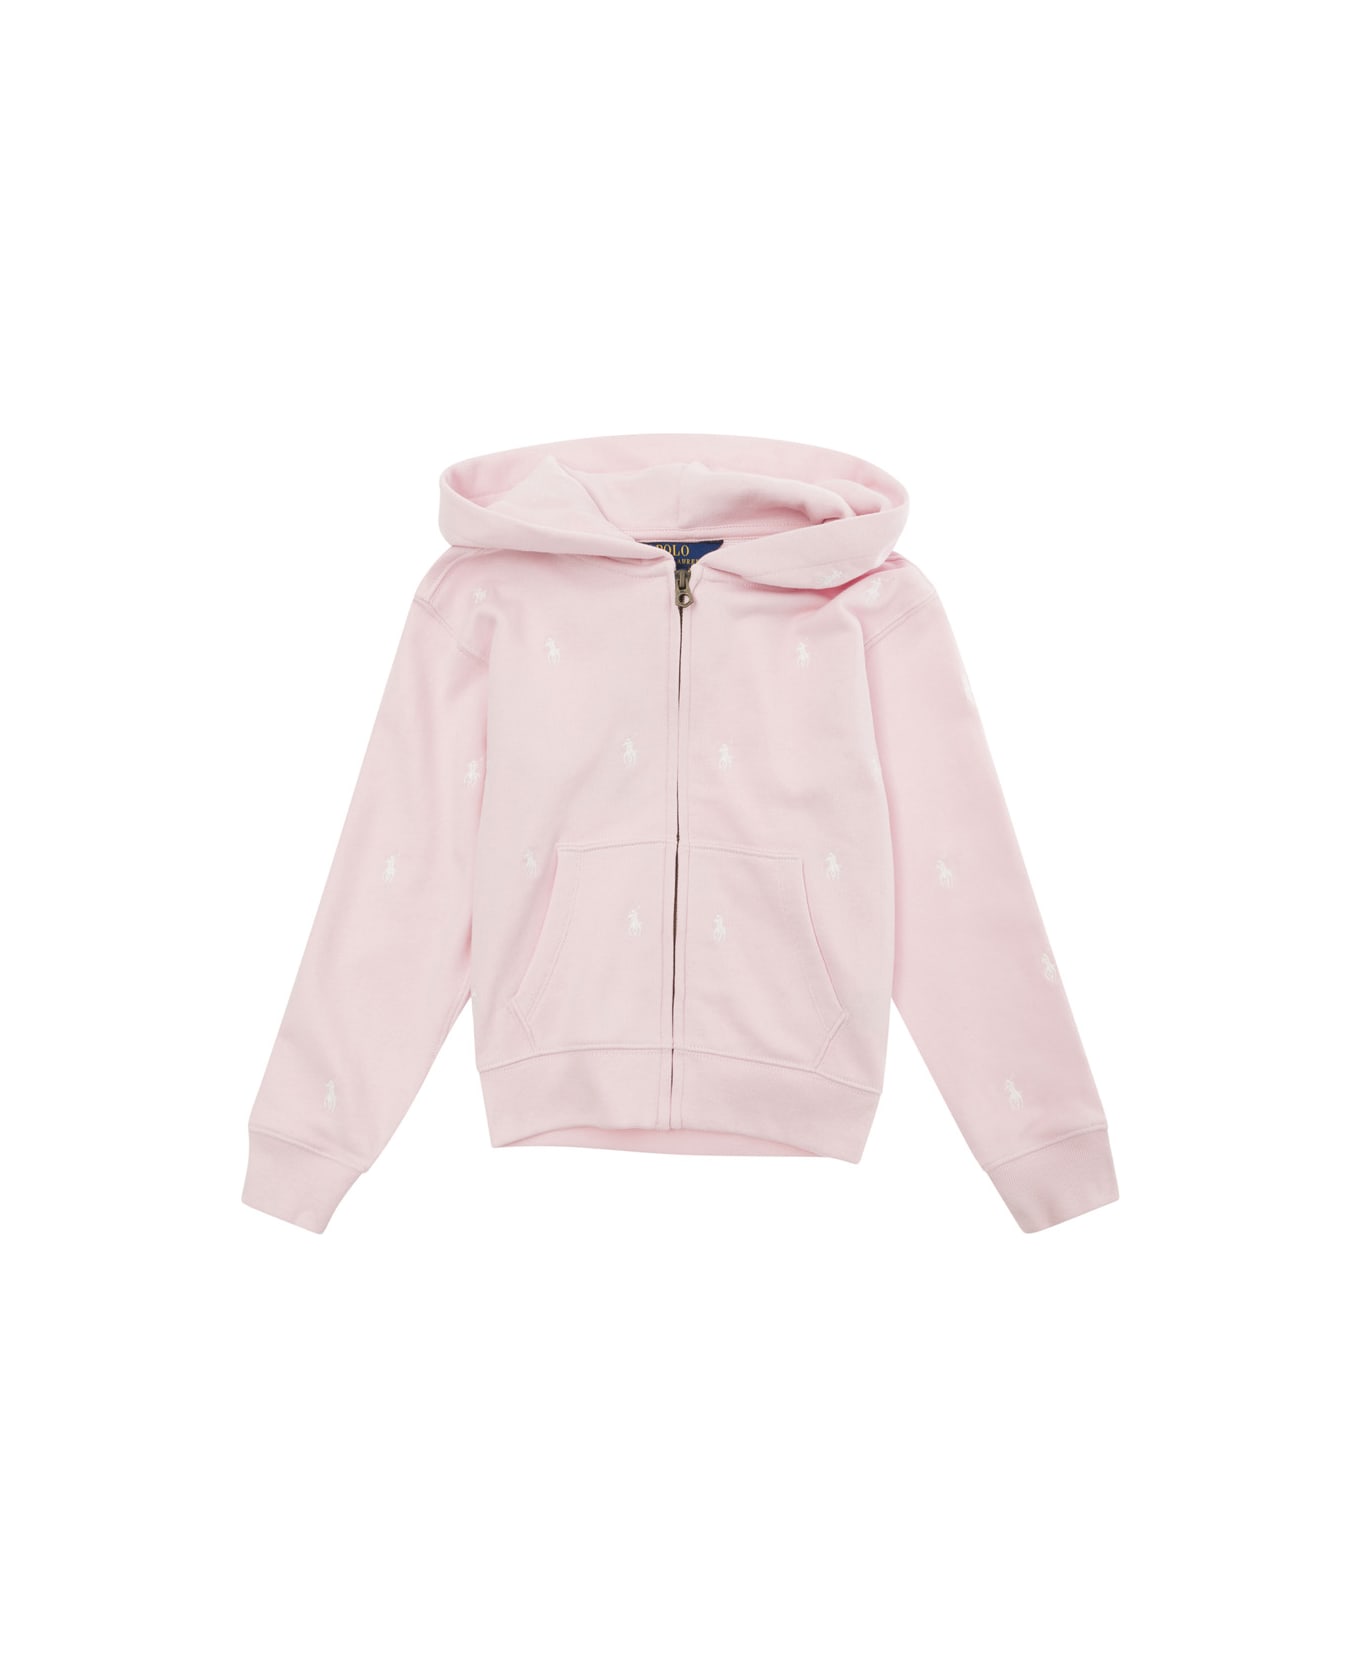 Polo Ralph Lauren Pink Hoodie With Embroidered Pony In Cotton Blend Girl - Pink ニットウェア＆スウェットシャツ